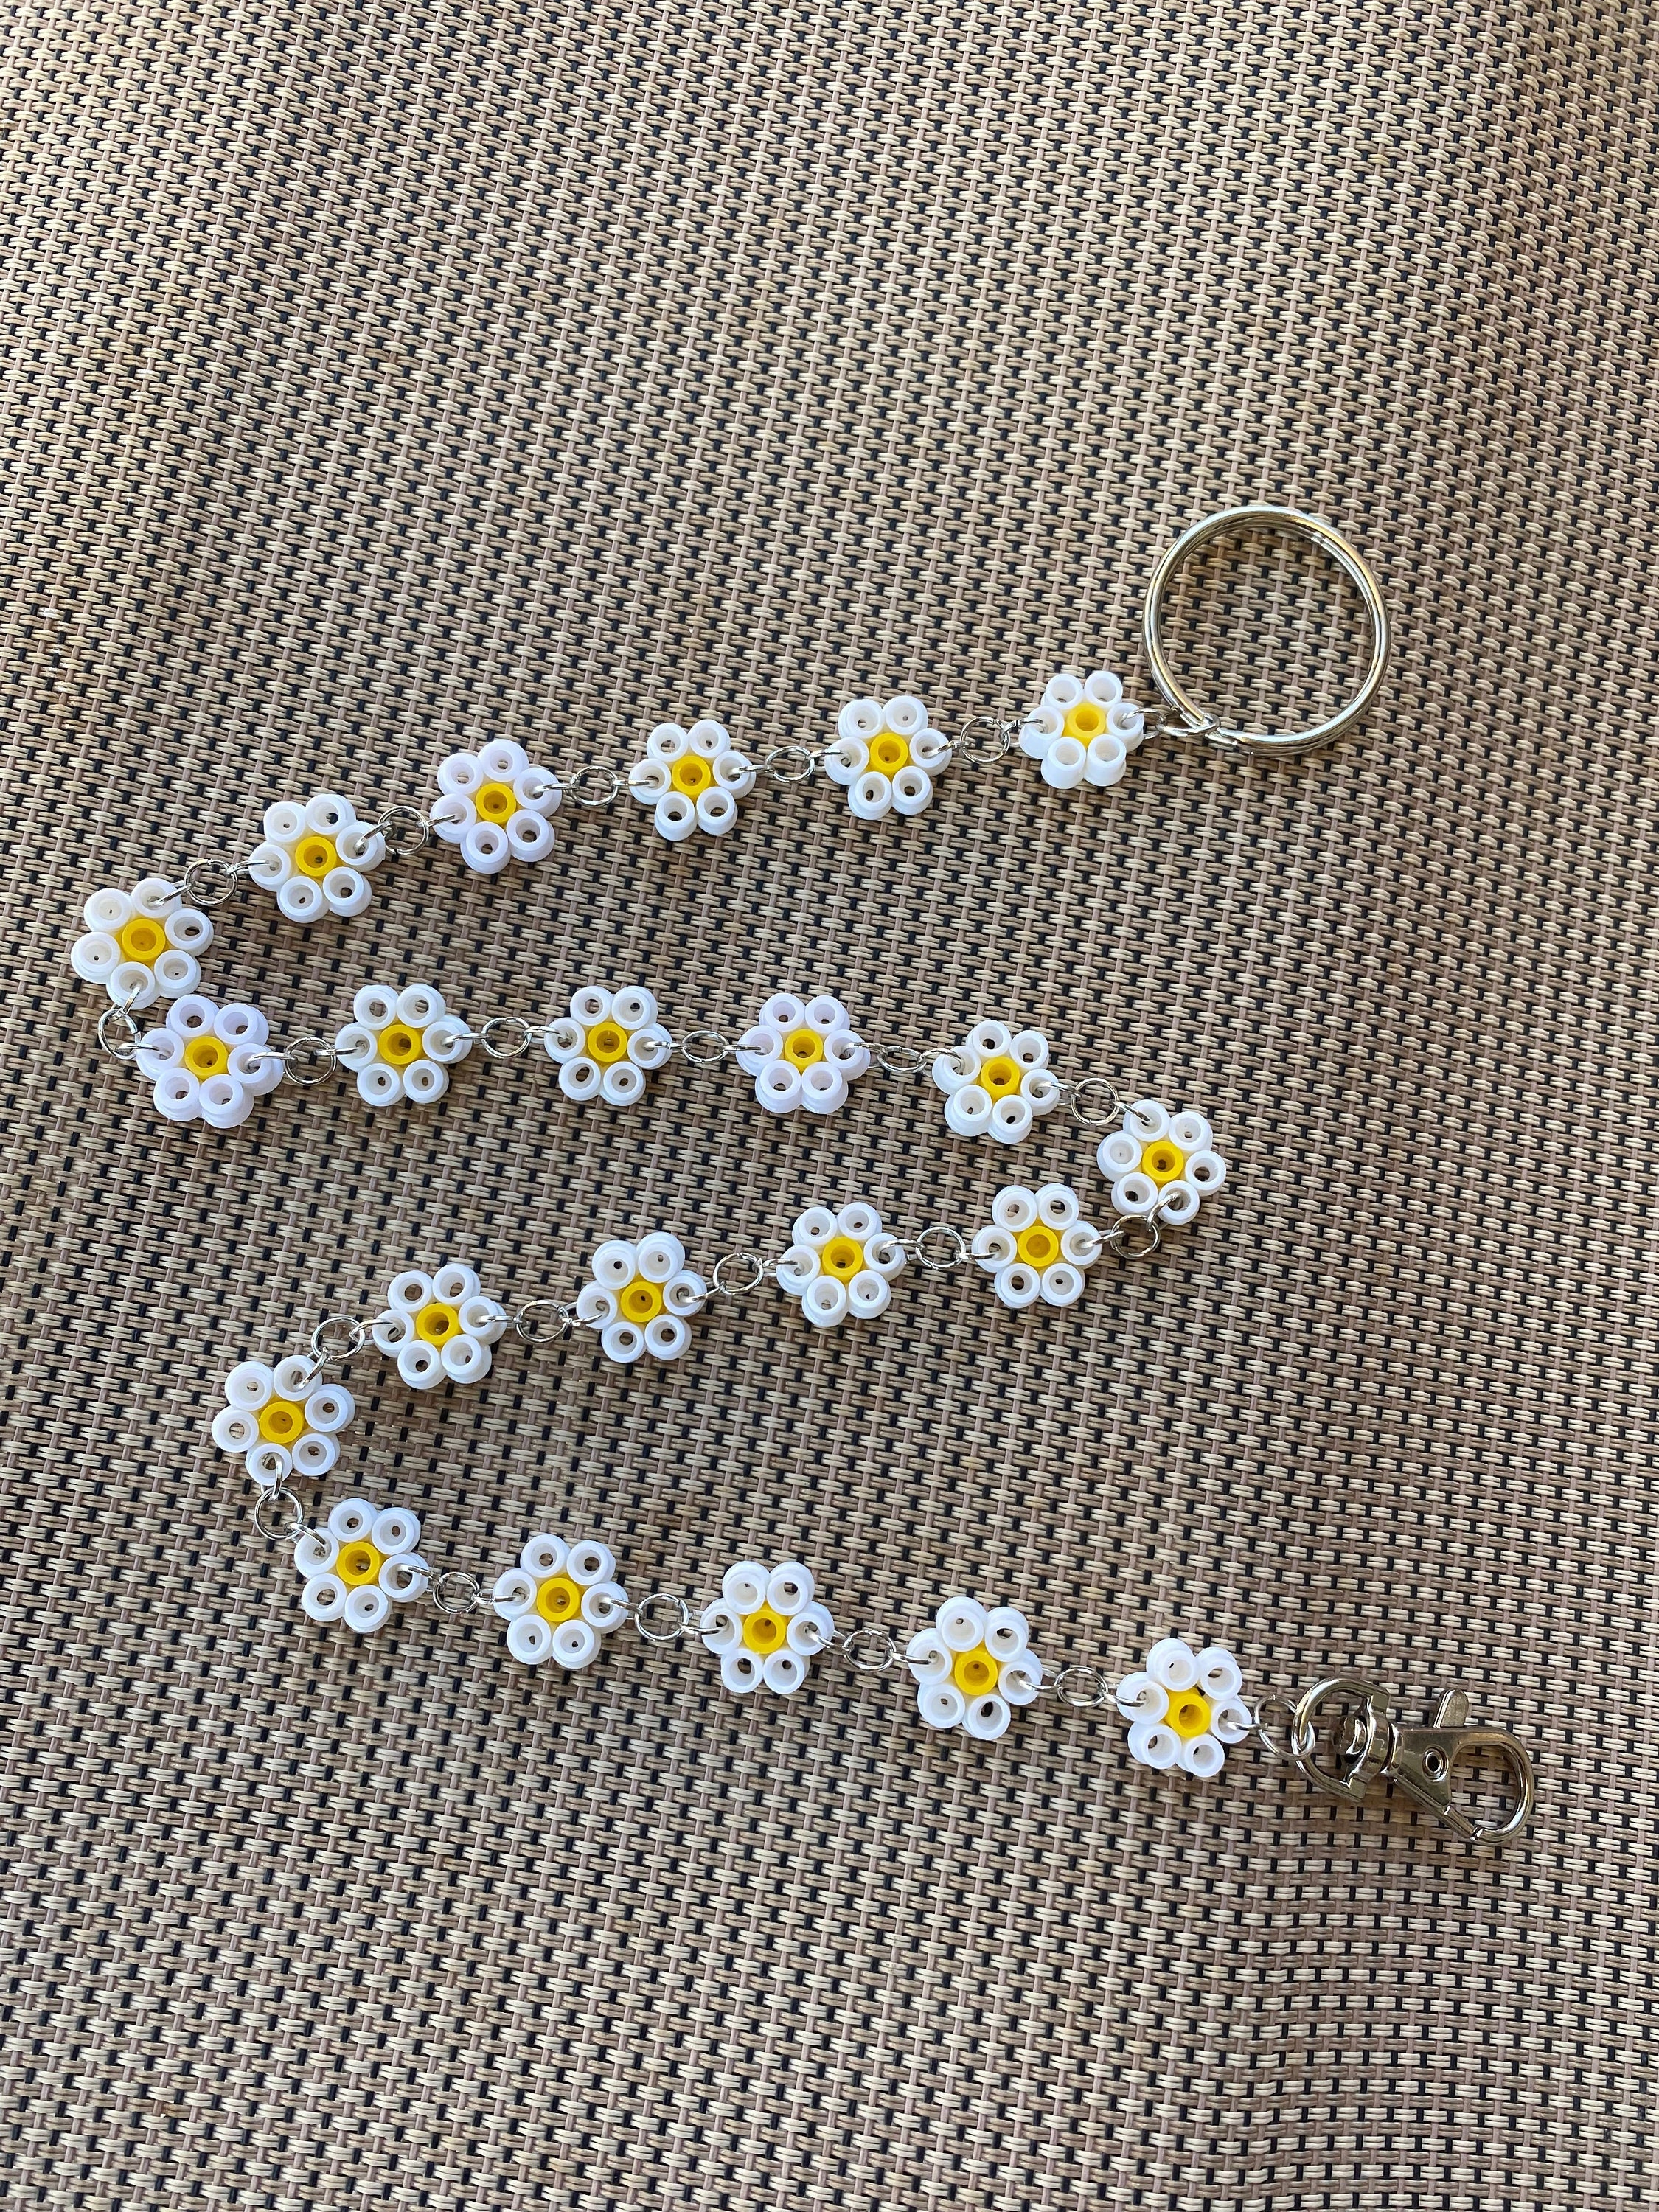 Sunflower Daisy Jean Chain Super Cute and Fun Perler Bead Daisy Jean Chains  22 Inches Long With Heavy Duty Jump Rings & Extra Flowers 